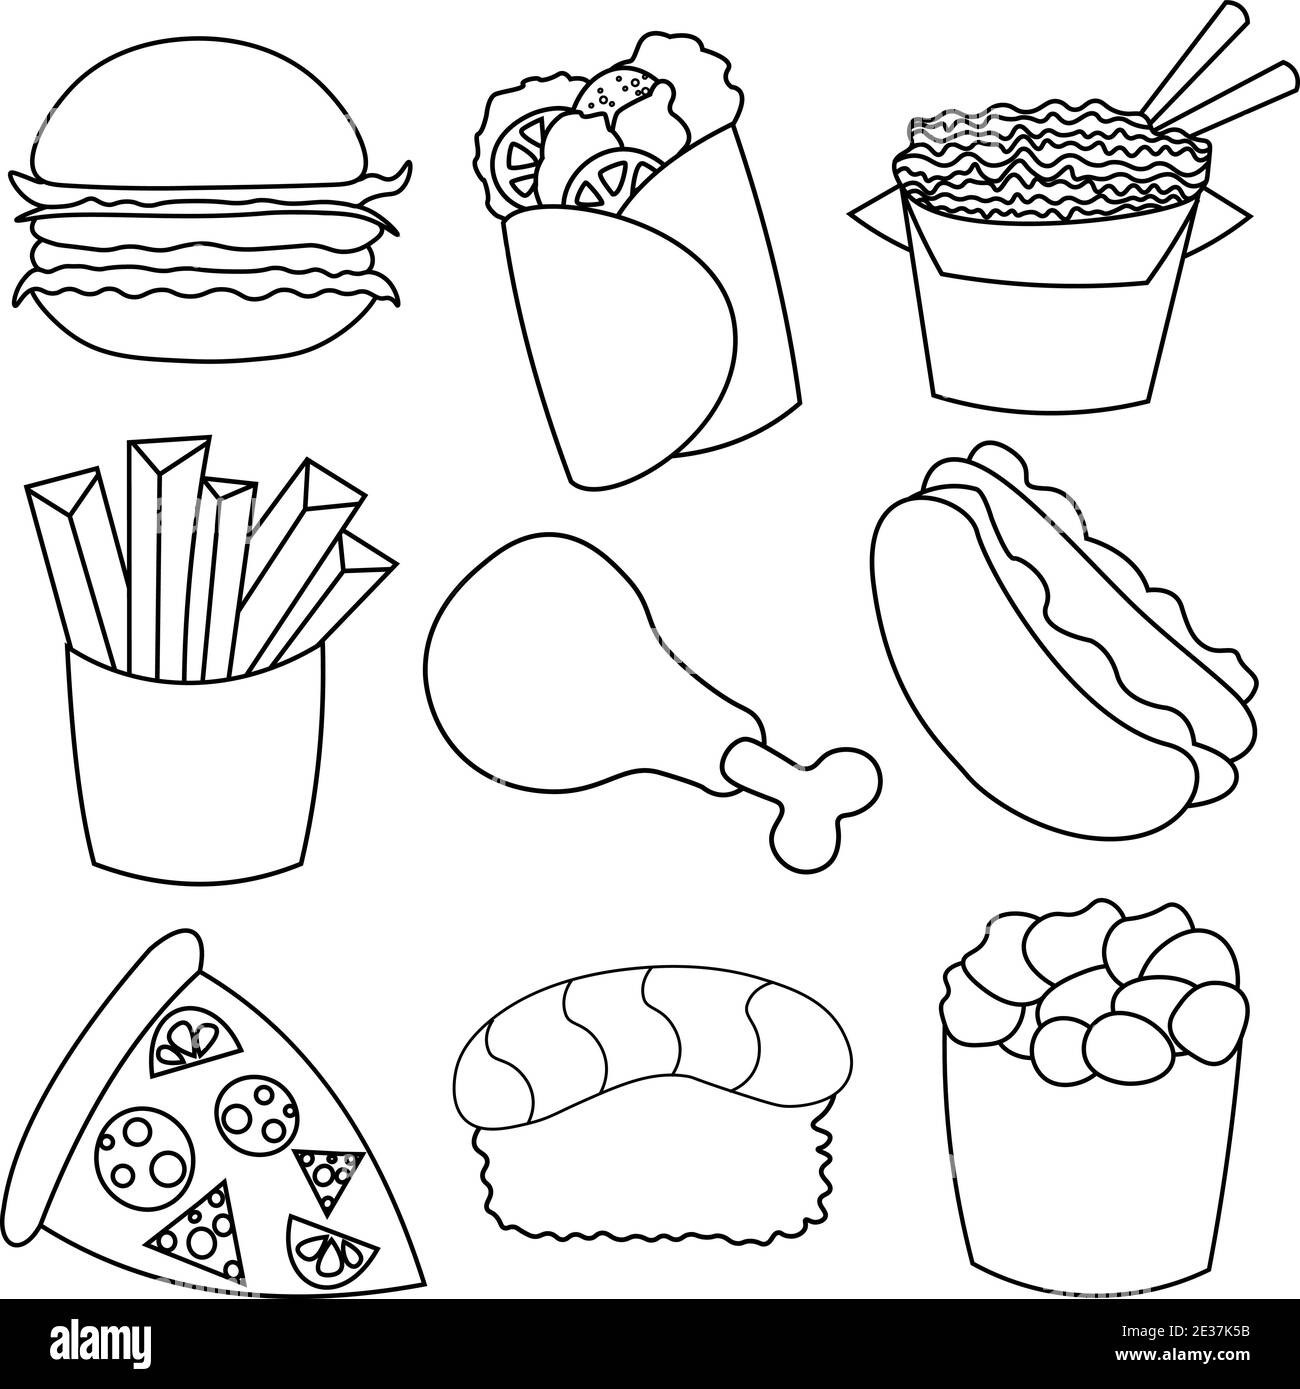 It can be used for childs colouring, icons, web, postcards, decor, pacaging, prints for things, covers for notebooks, decoration of boxes for toys, st Stock Vector